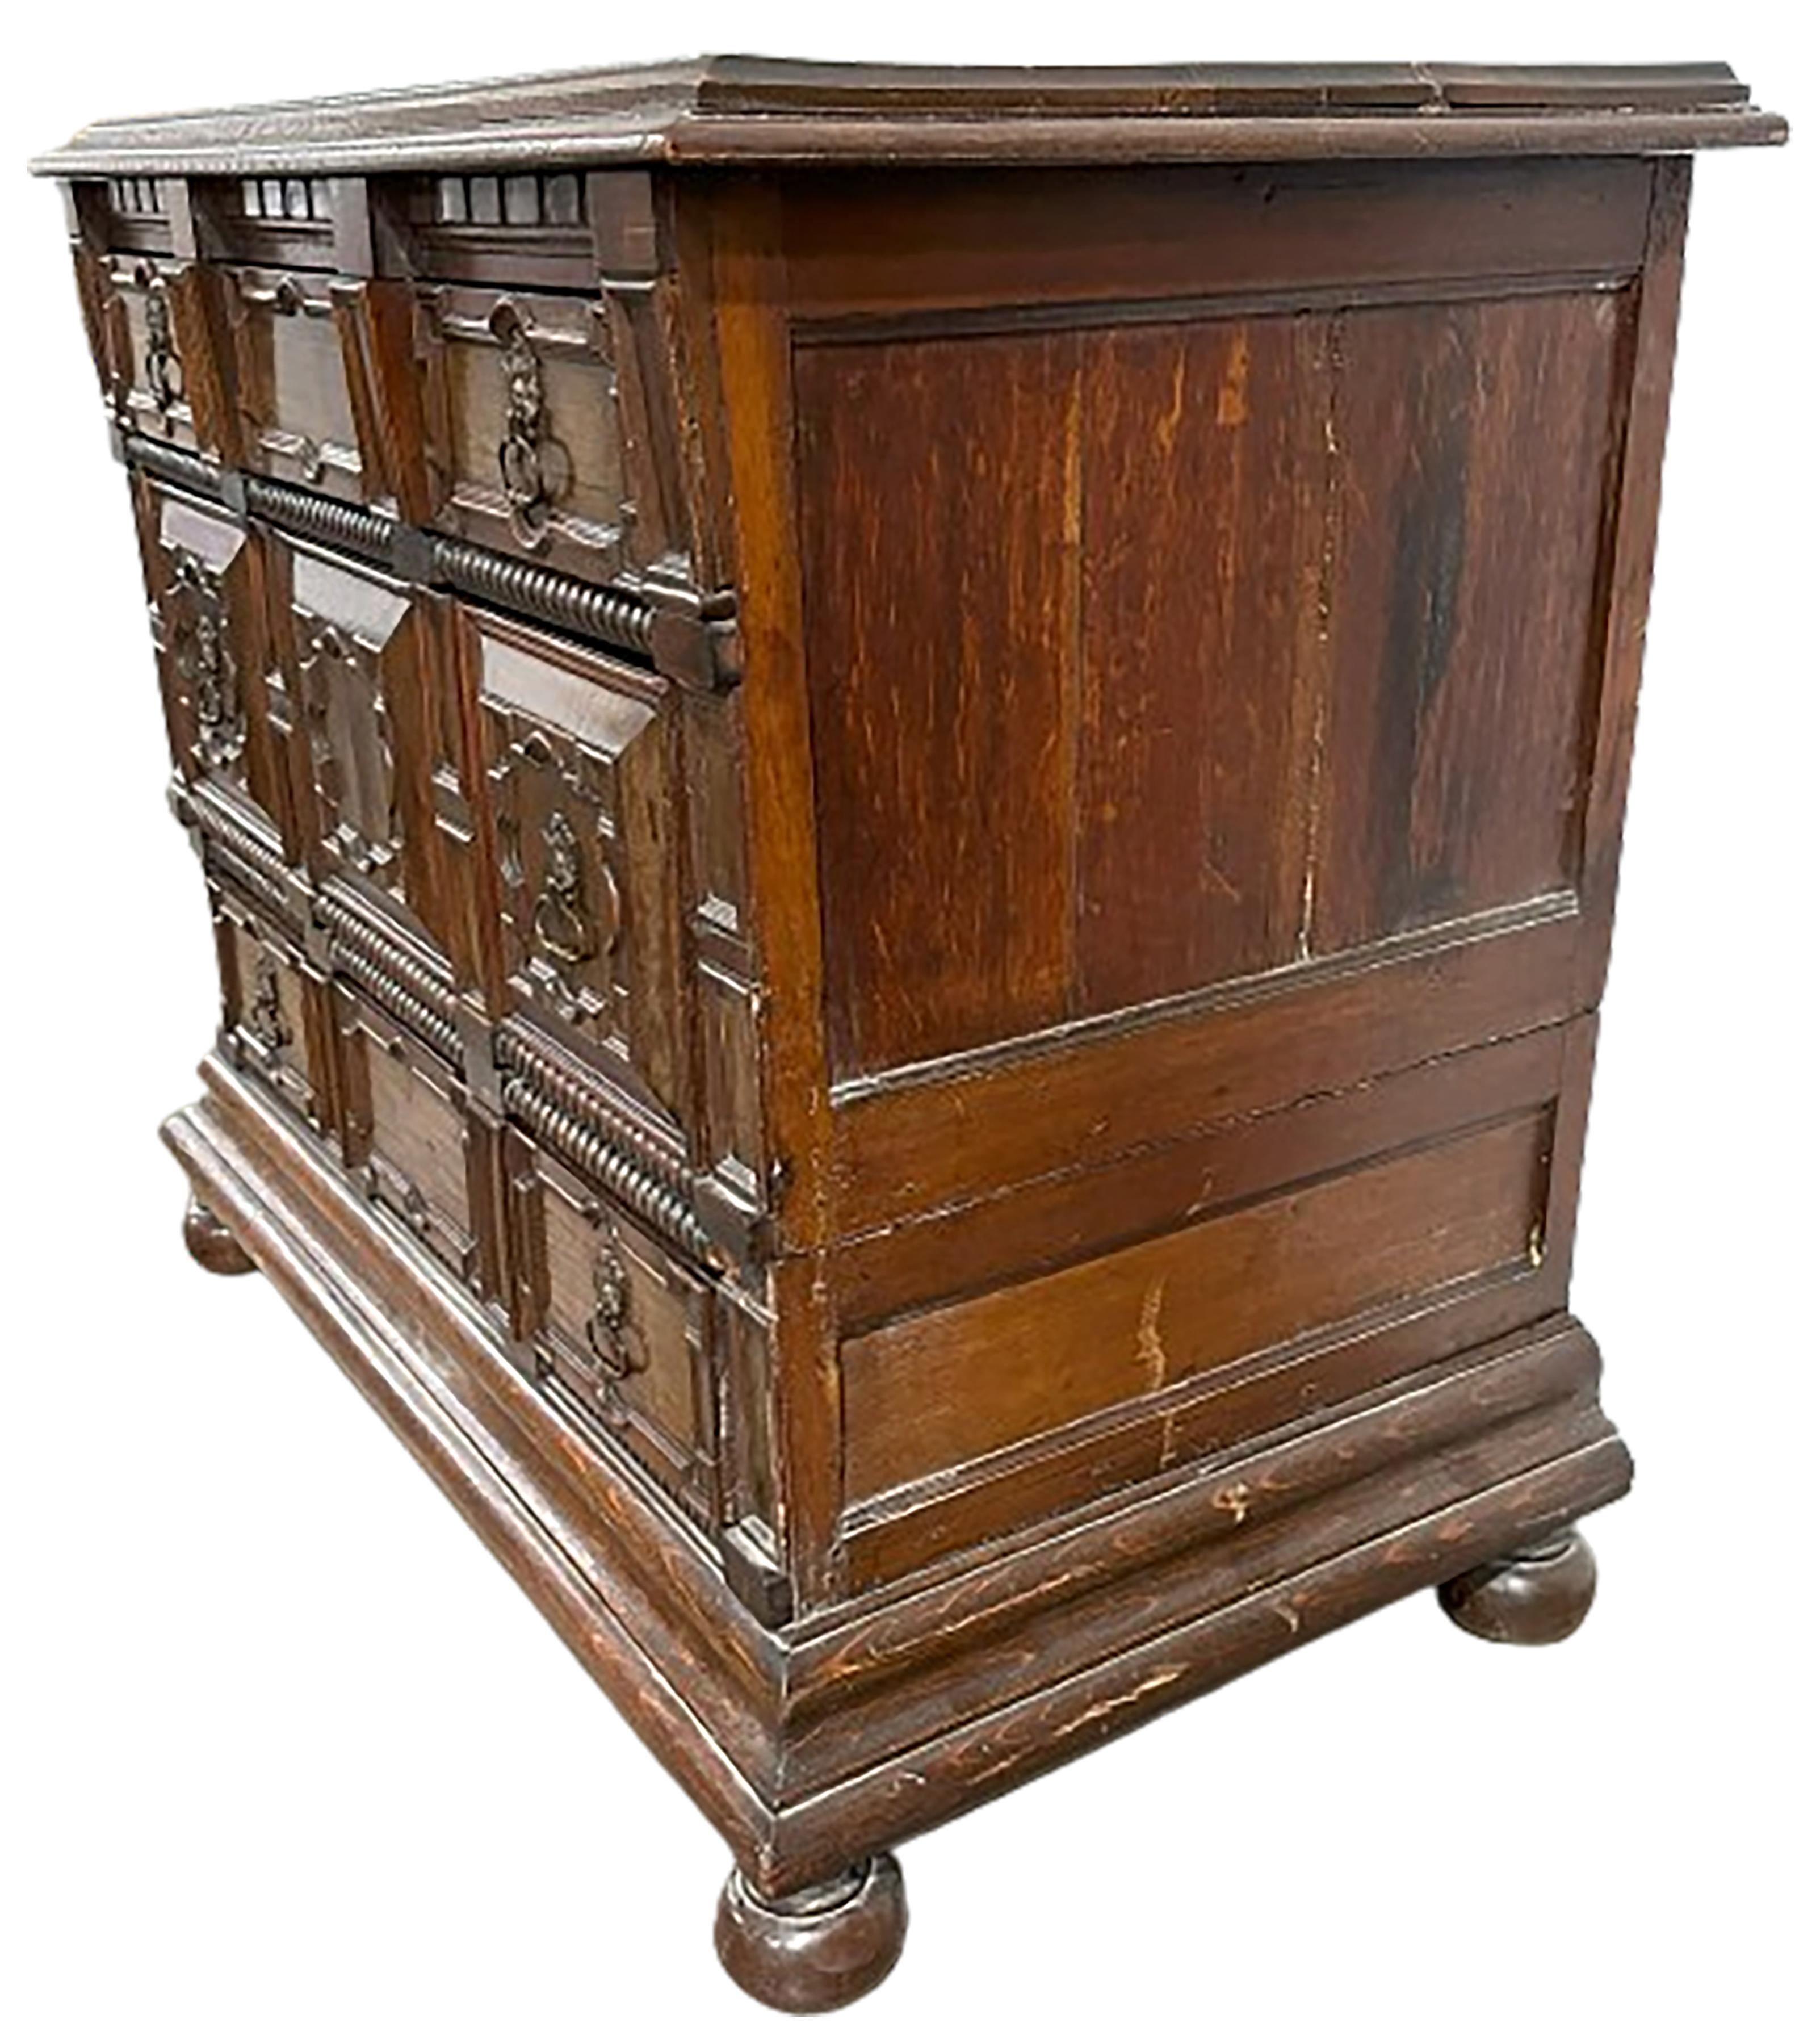 A handsome 19th century English Jacobean style chest of drawers. Finely carved cabinet drawers with brass handles with small gargoyle faces that open up three cabinets. Raised on cannonball feet. Divides up into two parts. Center and cabinet doors